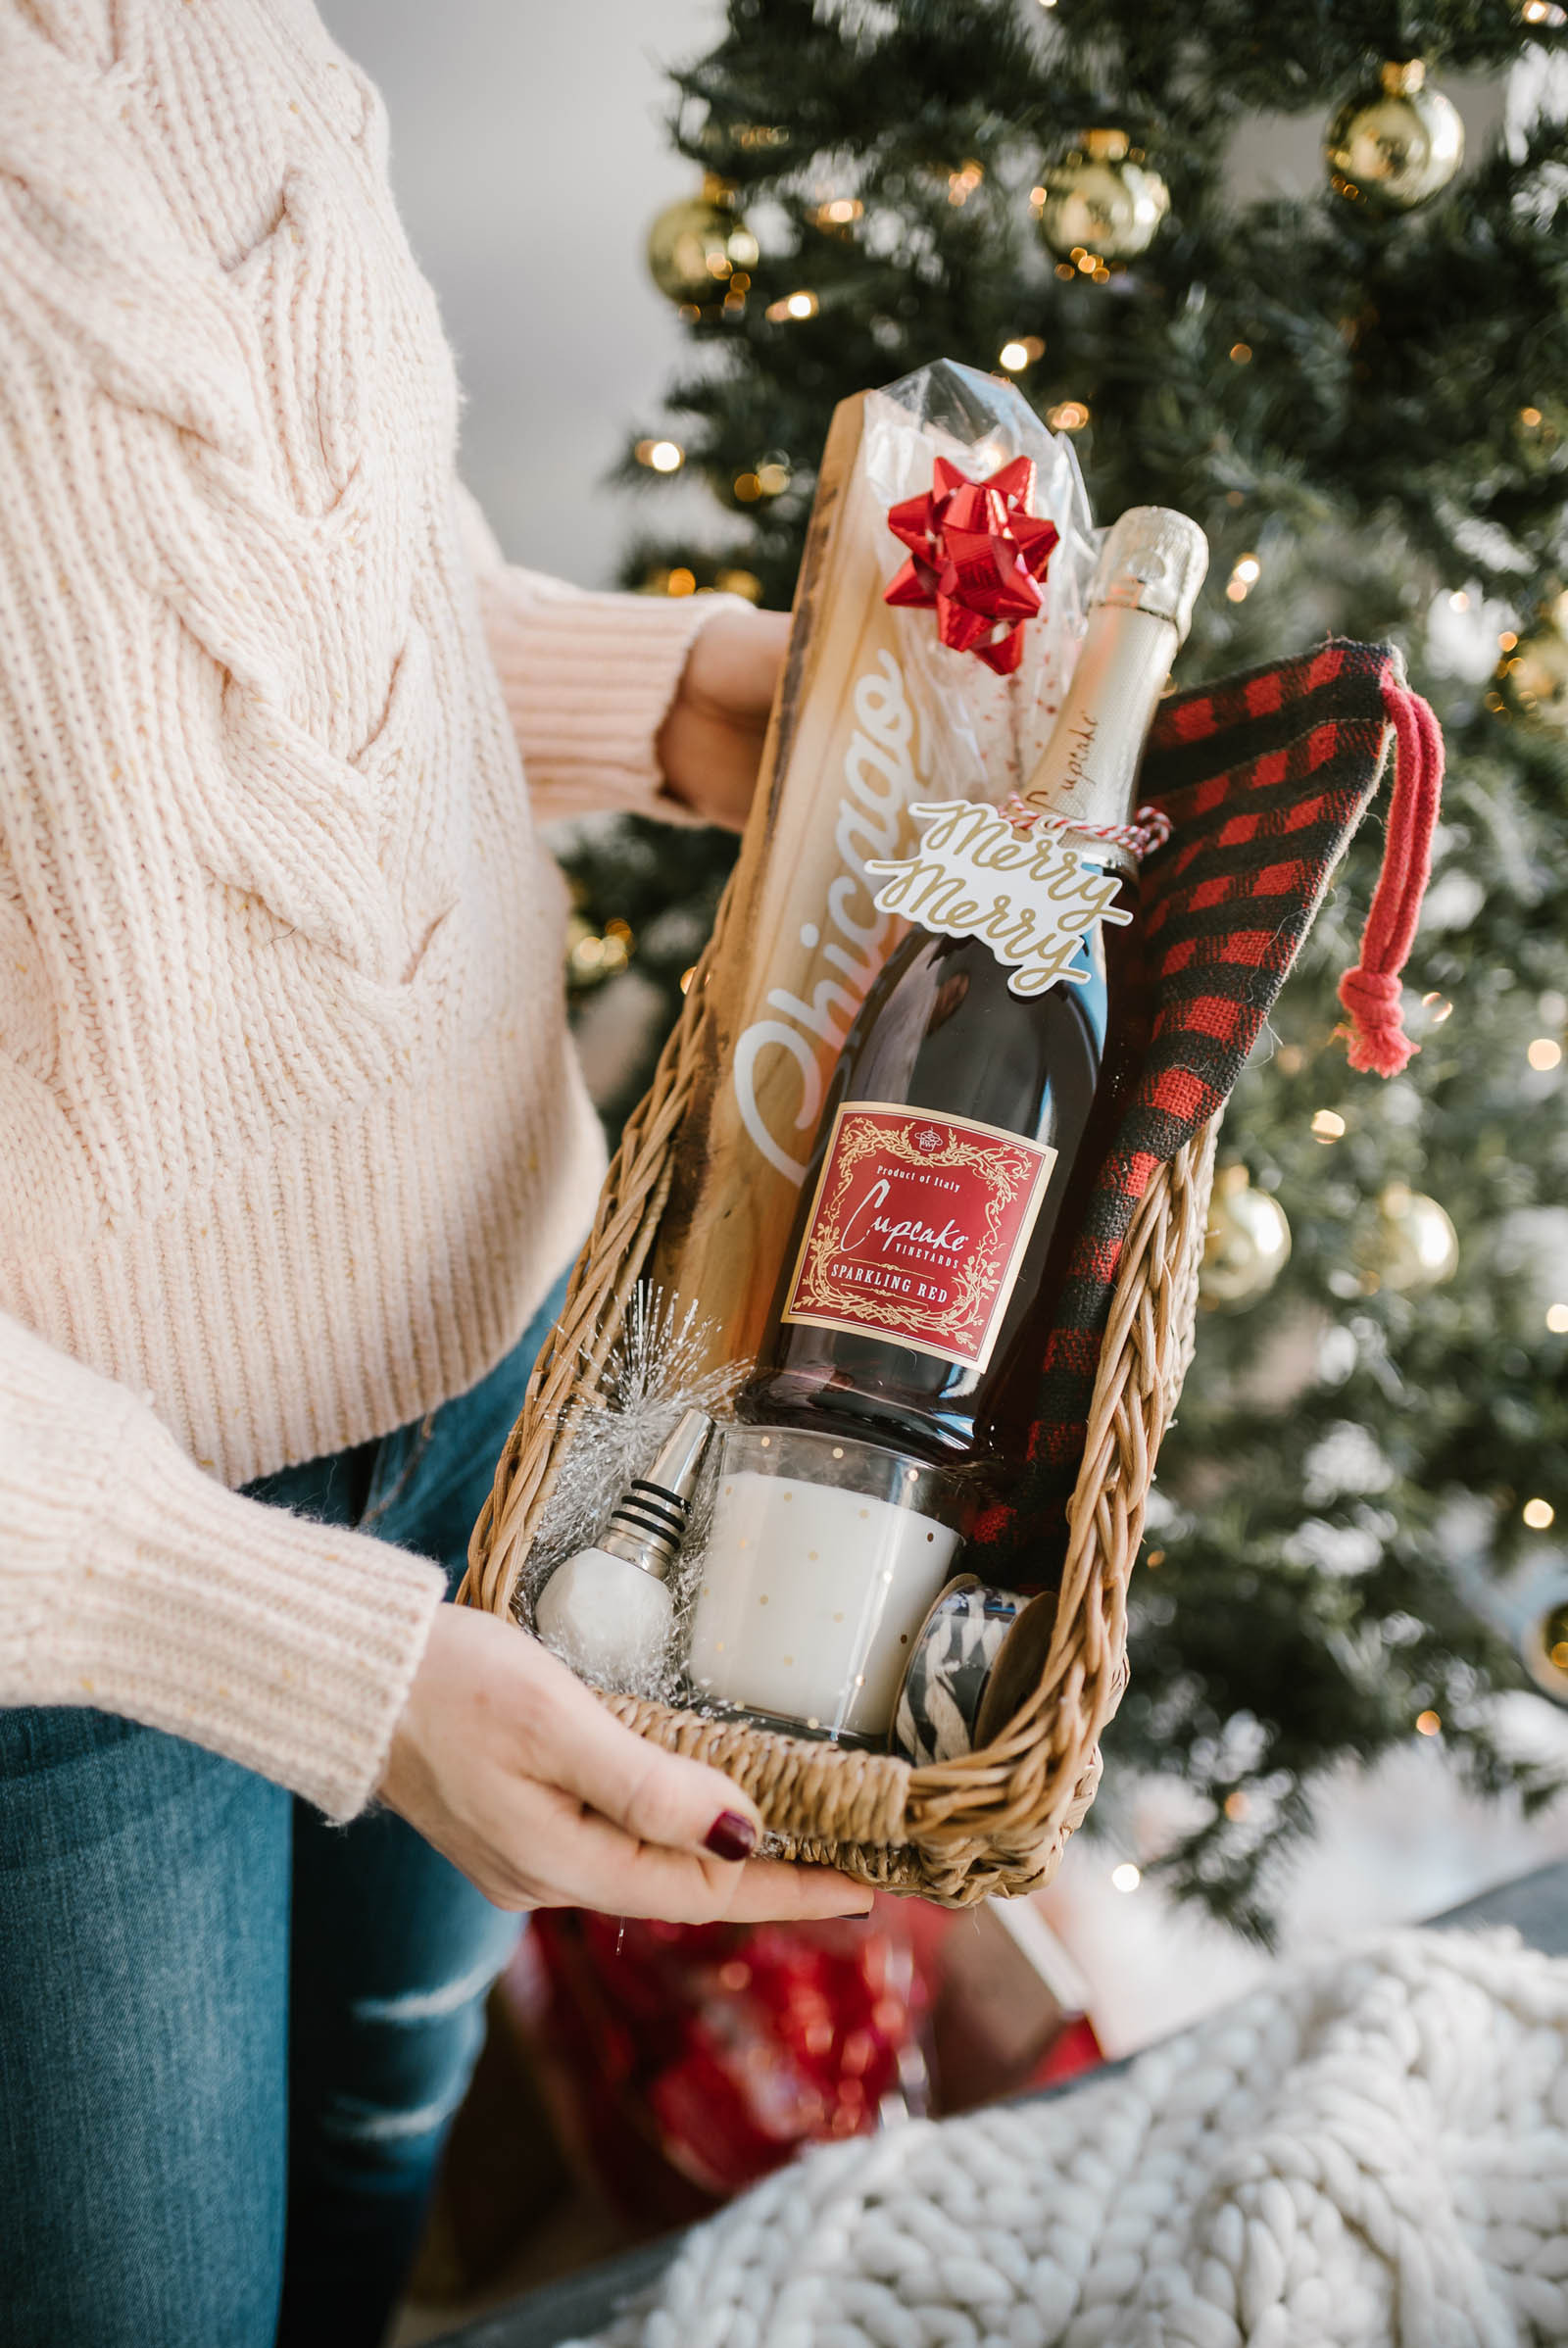 Homemade Holiday Gift Basket Ideas
 Last Minute Holiday Idea Easy Homemade Gift Baskets